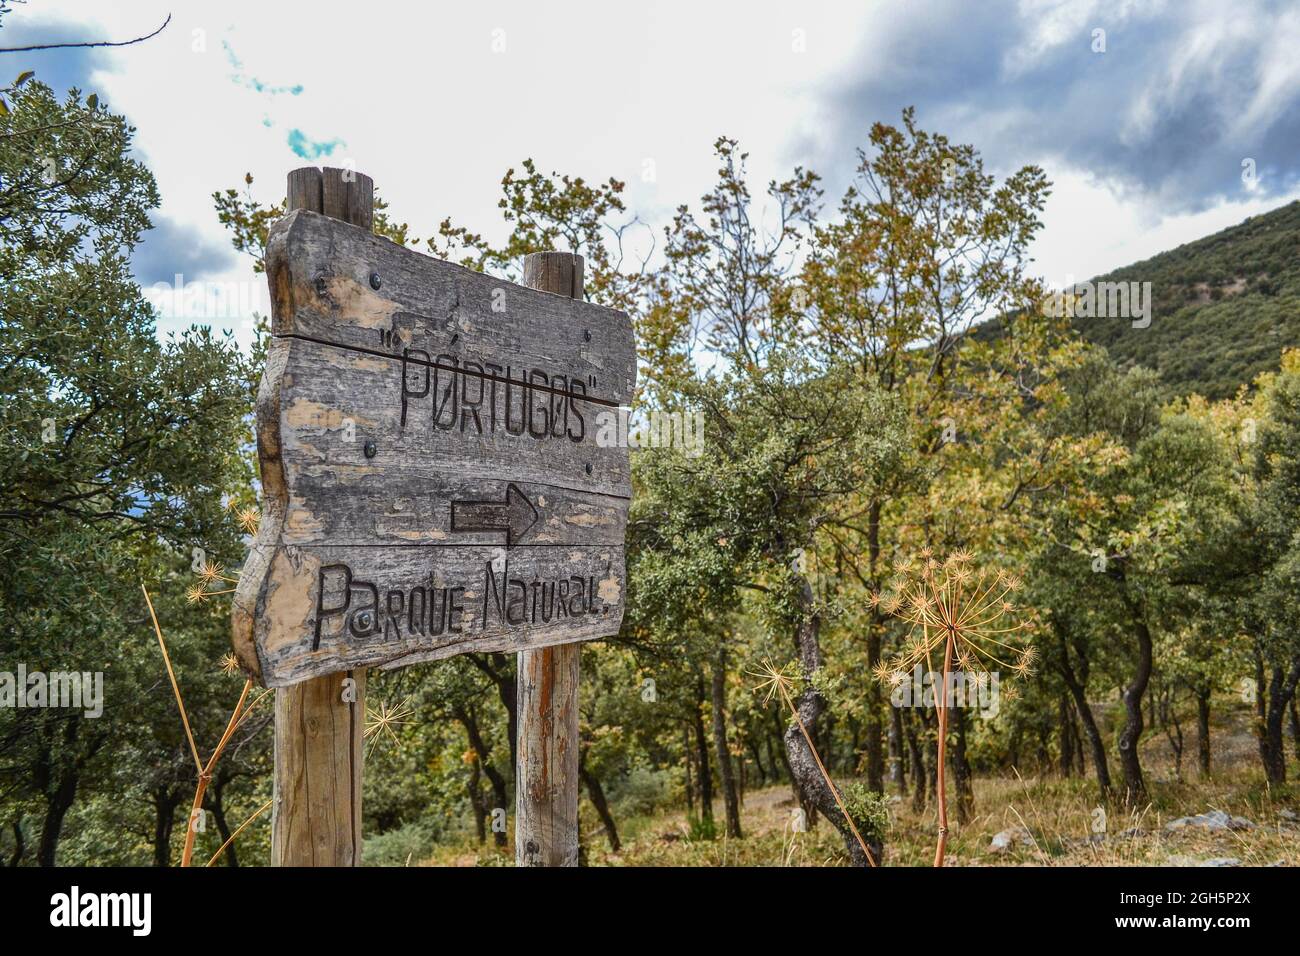 wooden sign pointing the way to Portugos Natural Park surrounded by yellow and green leafy trees in autumn Stock Photo